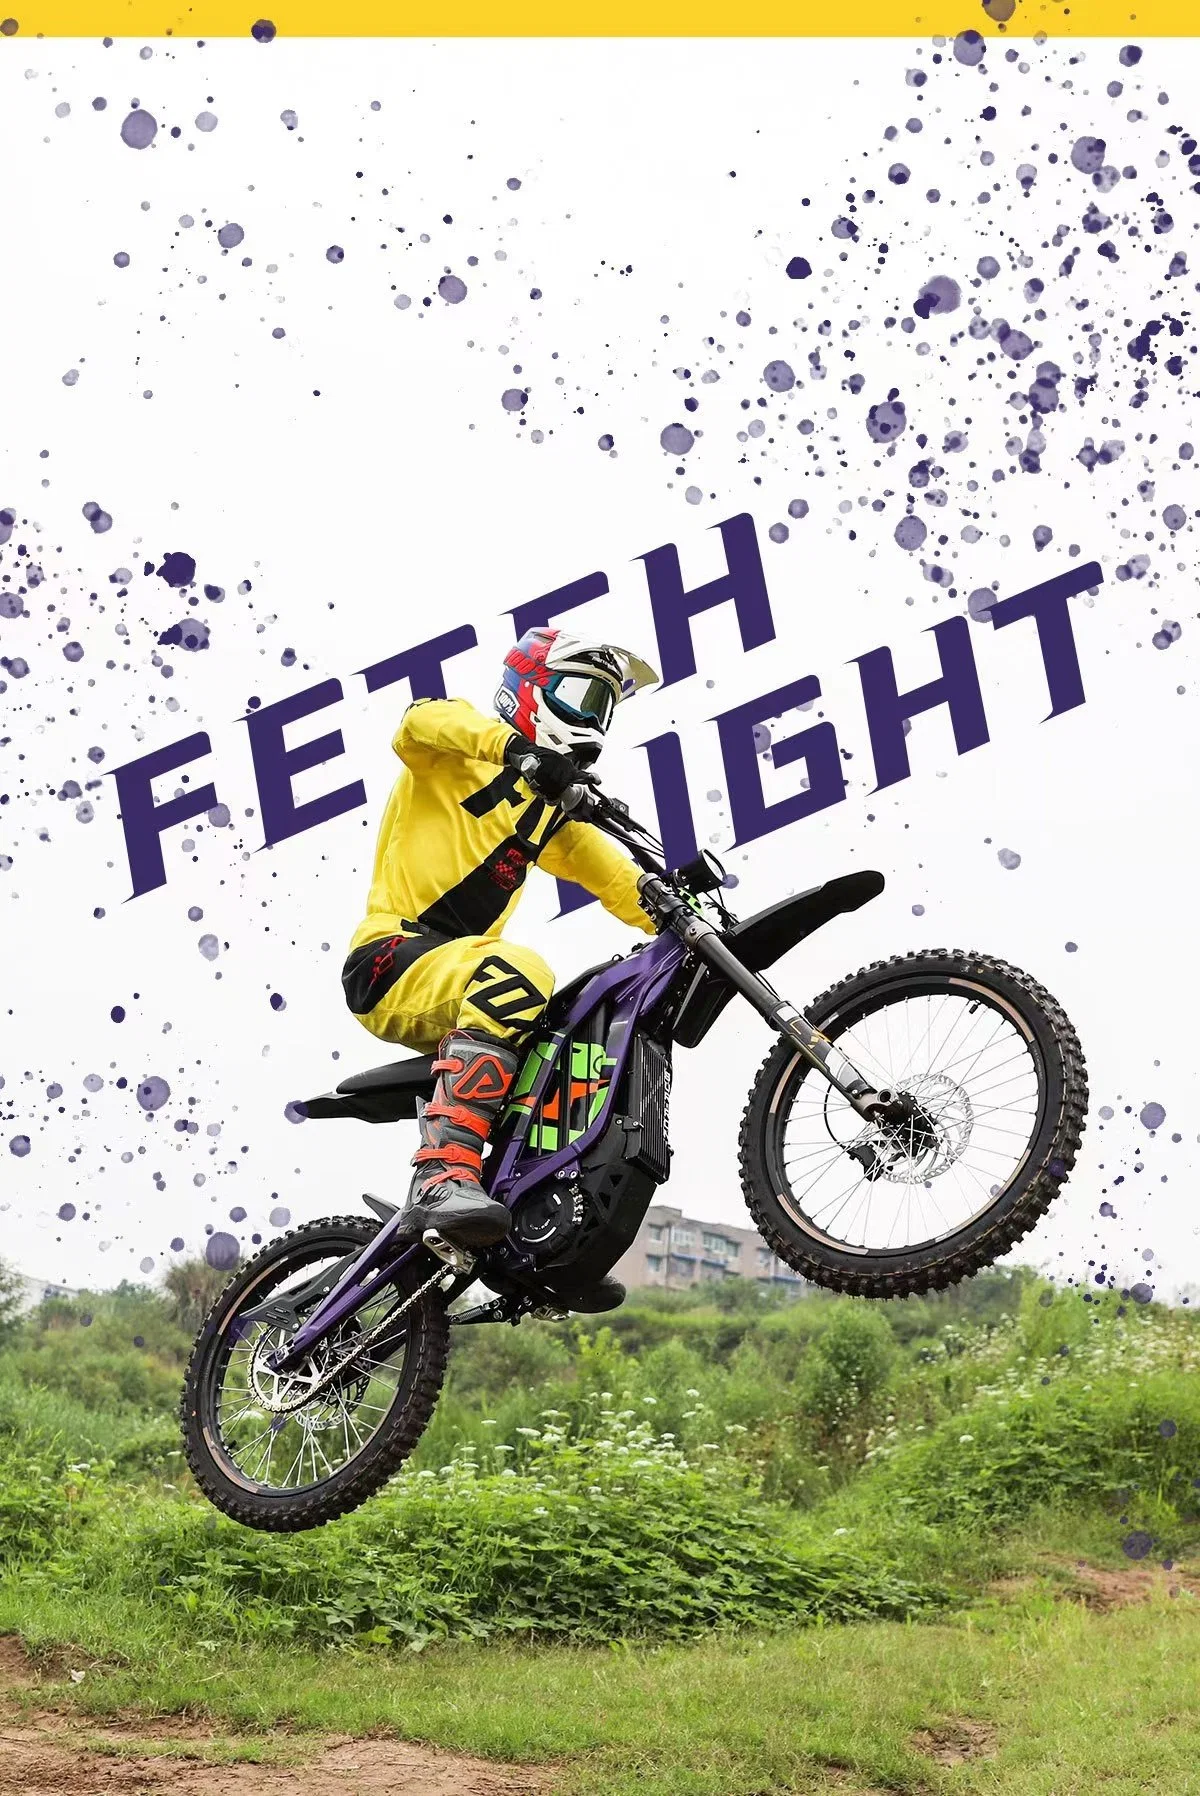 Ebike 6000W High Power Electric Dirt Bike Light Bee Lbx off Road Motorcycle 75km/H Max Speed with 60V 38.5ah Battery